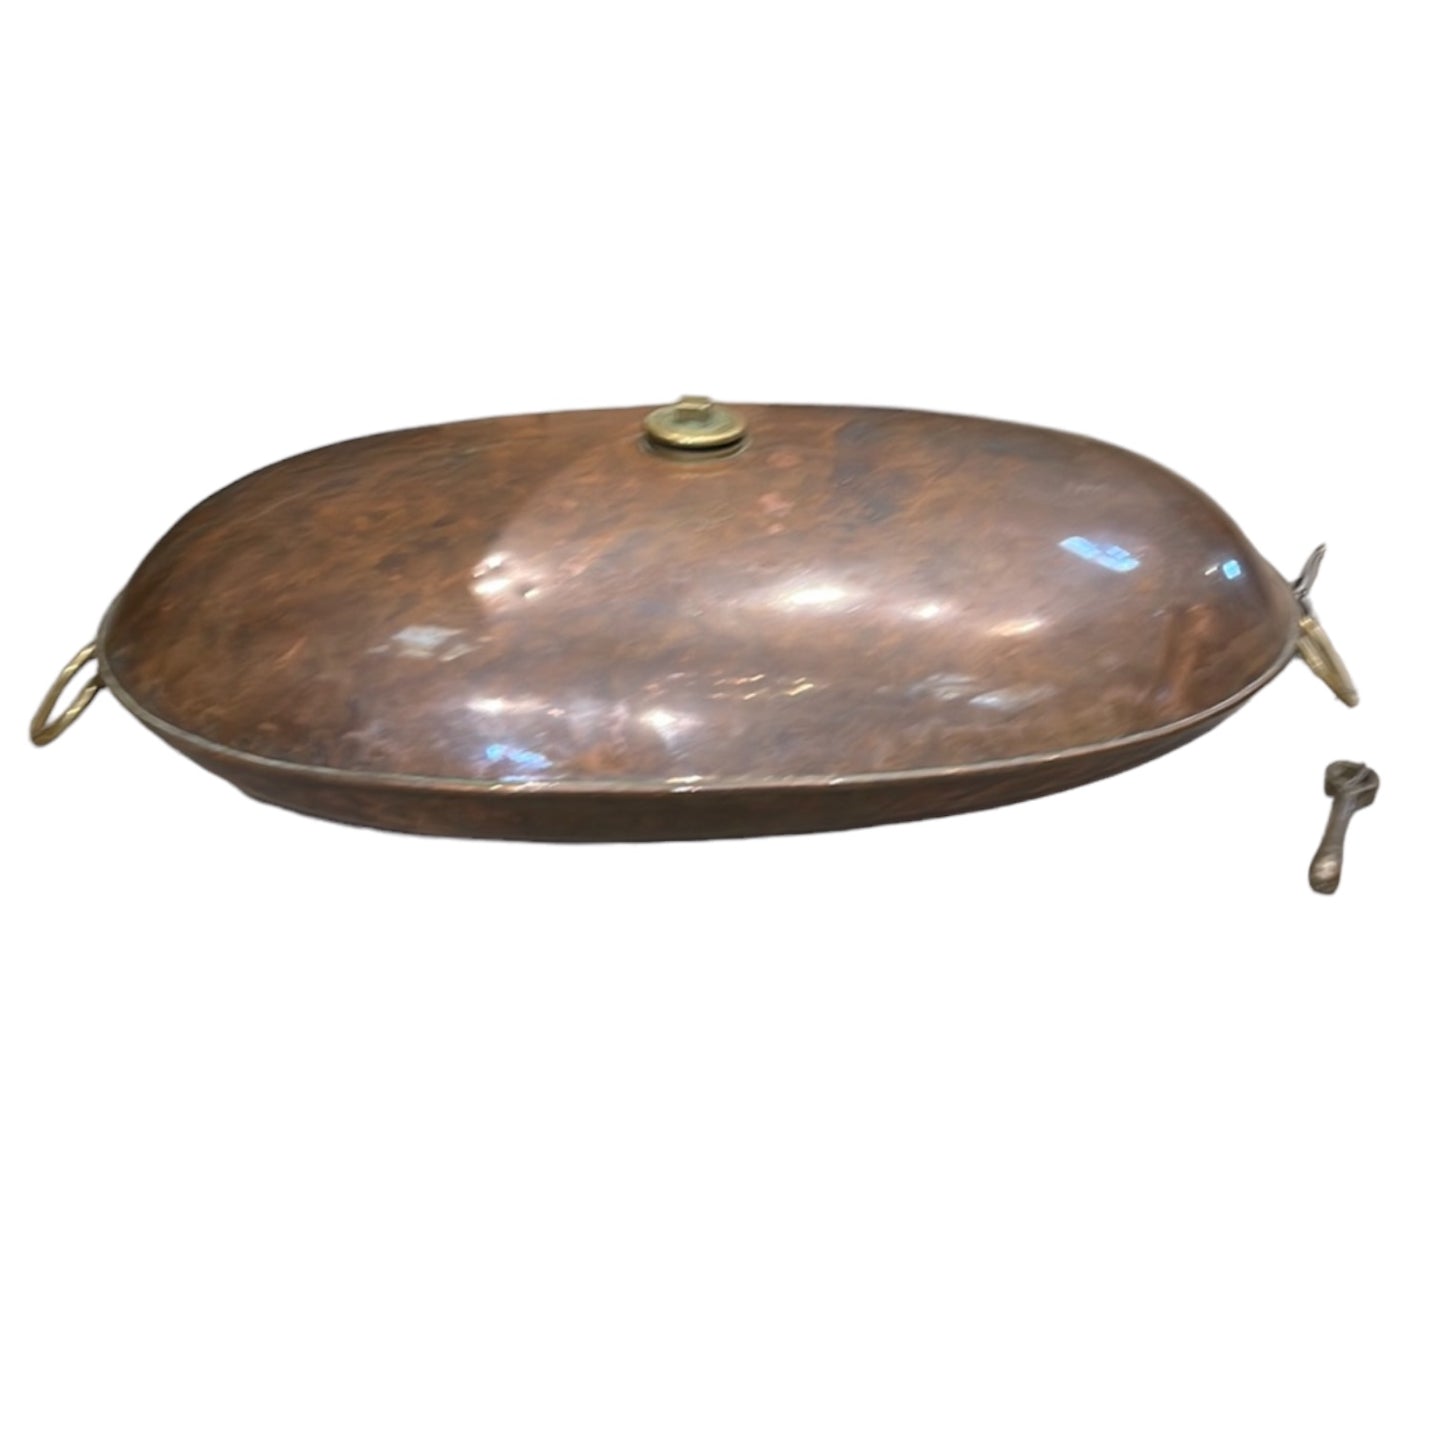 Copper Carriage Warmer